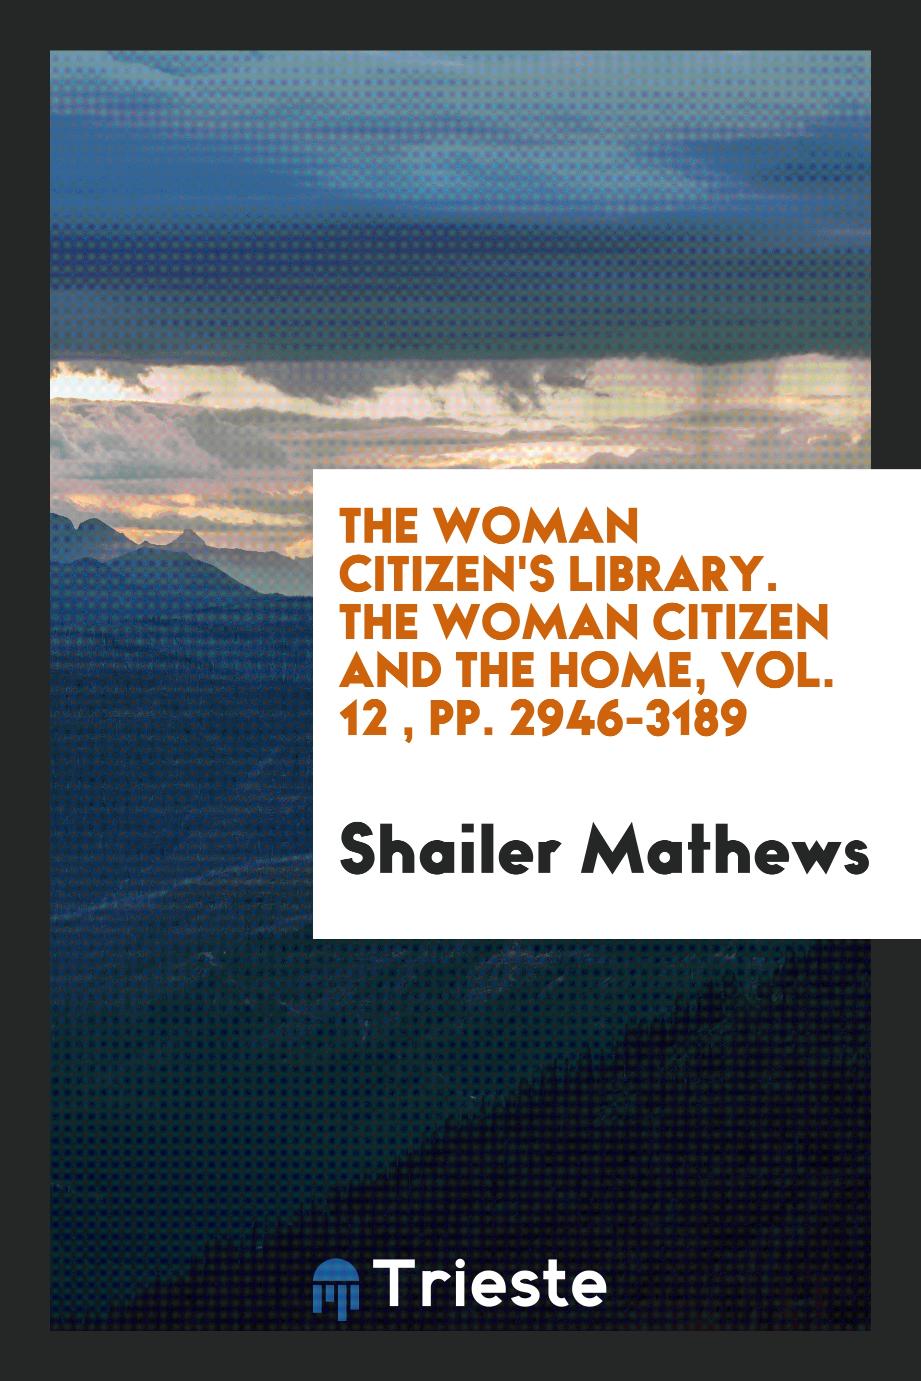 The woman citizen's Library. The woman citizen and the Home, Vol. 12 , pp. 2946-3189